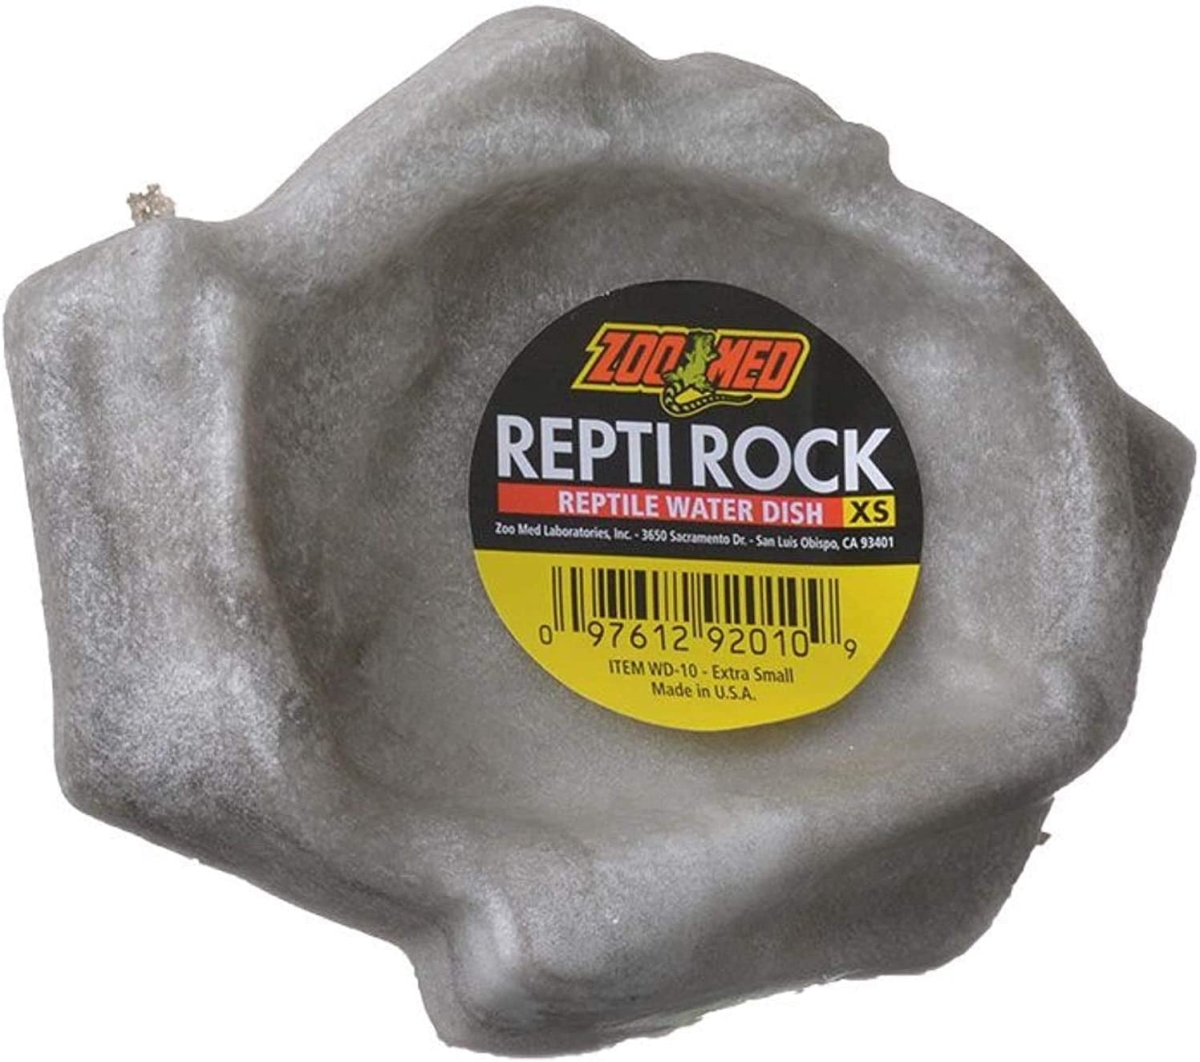 Picture of Zoo Med ZM92050M Repti Rock Reptile Water Dish